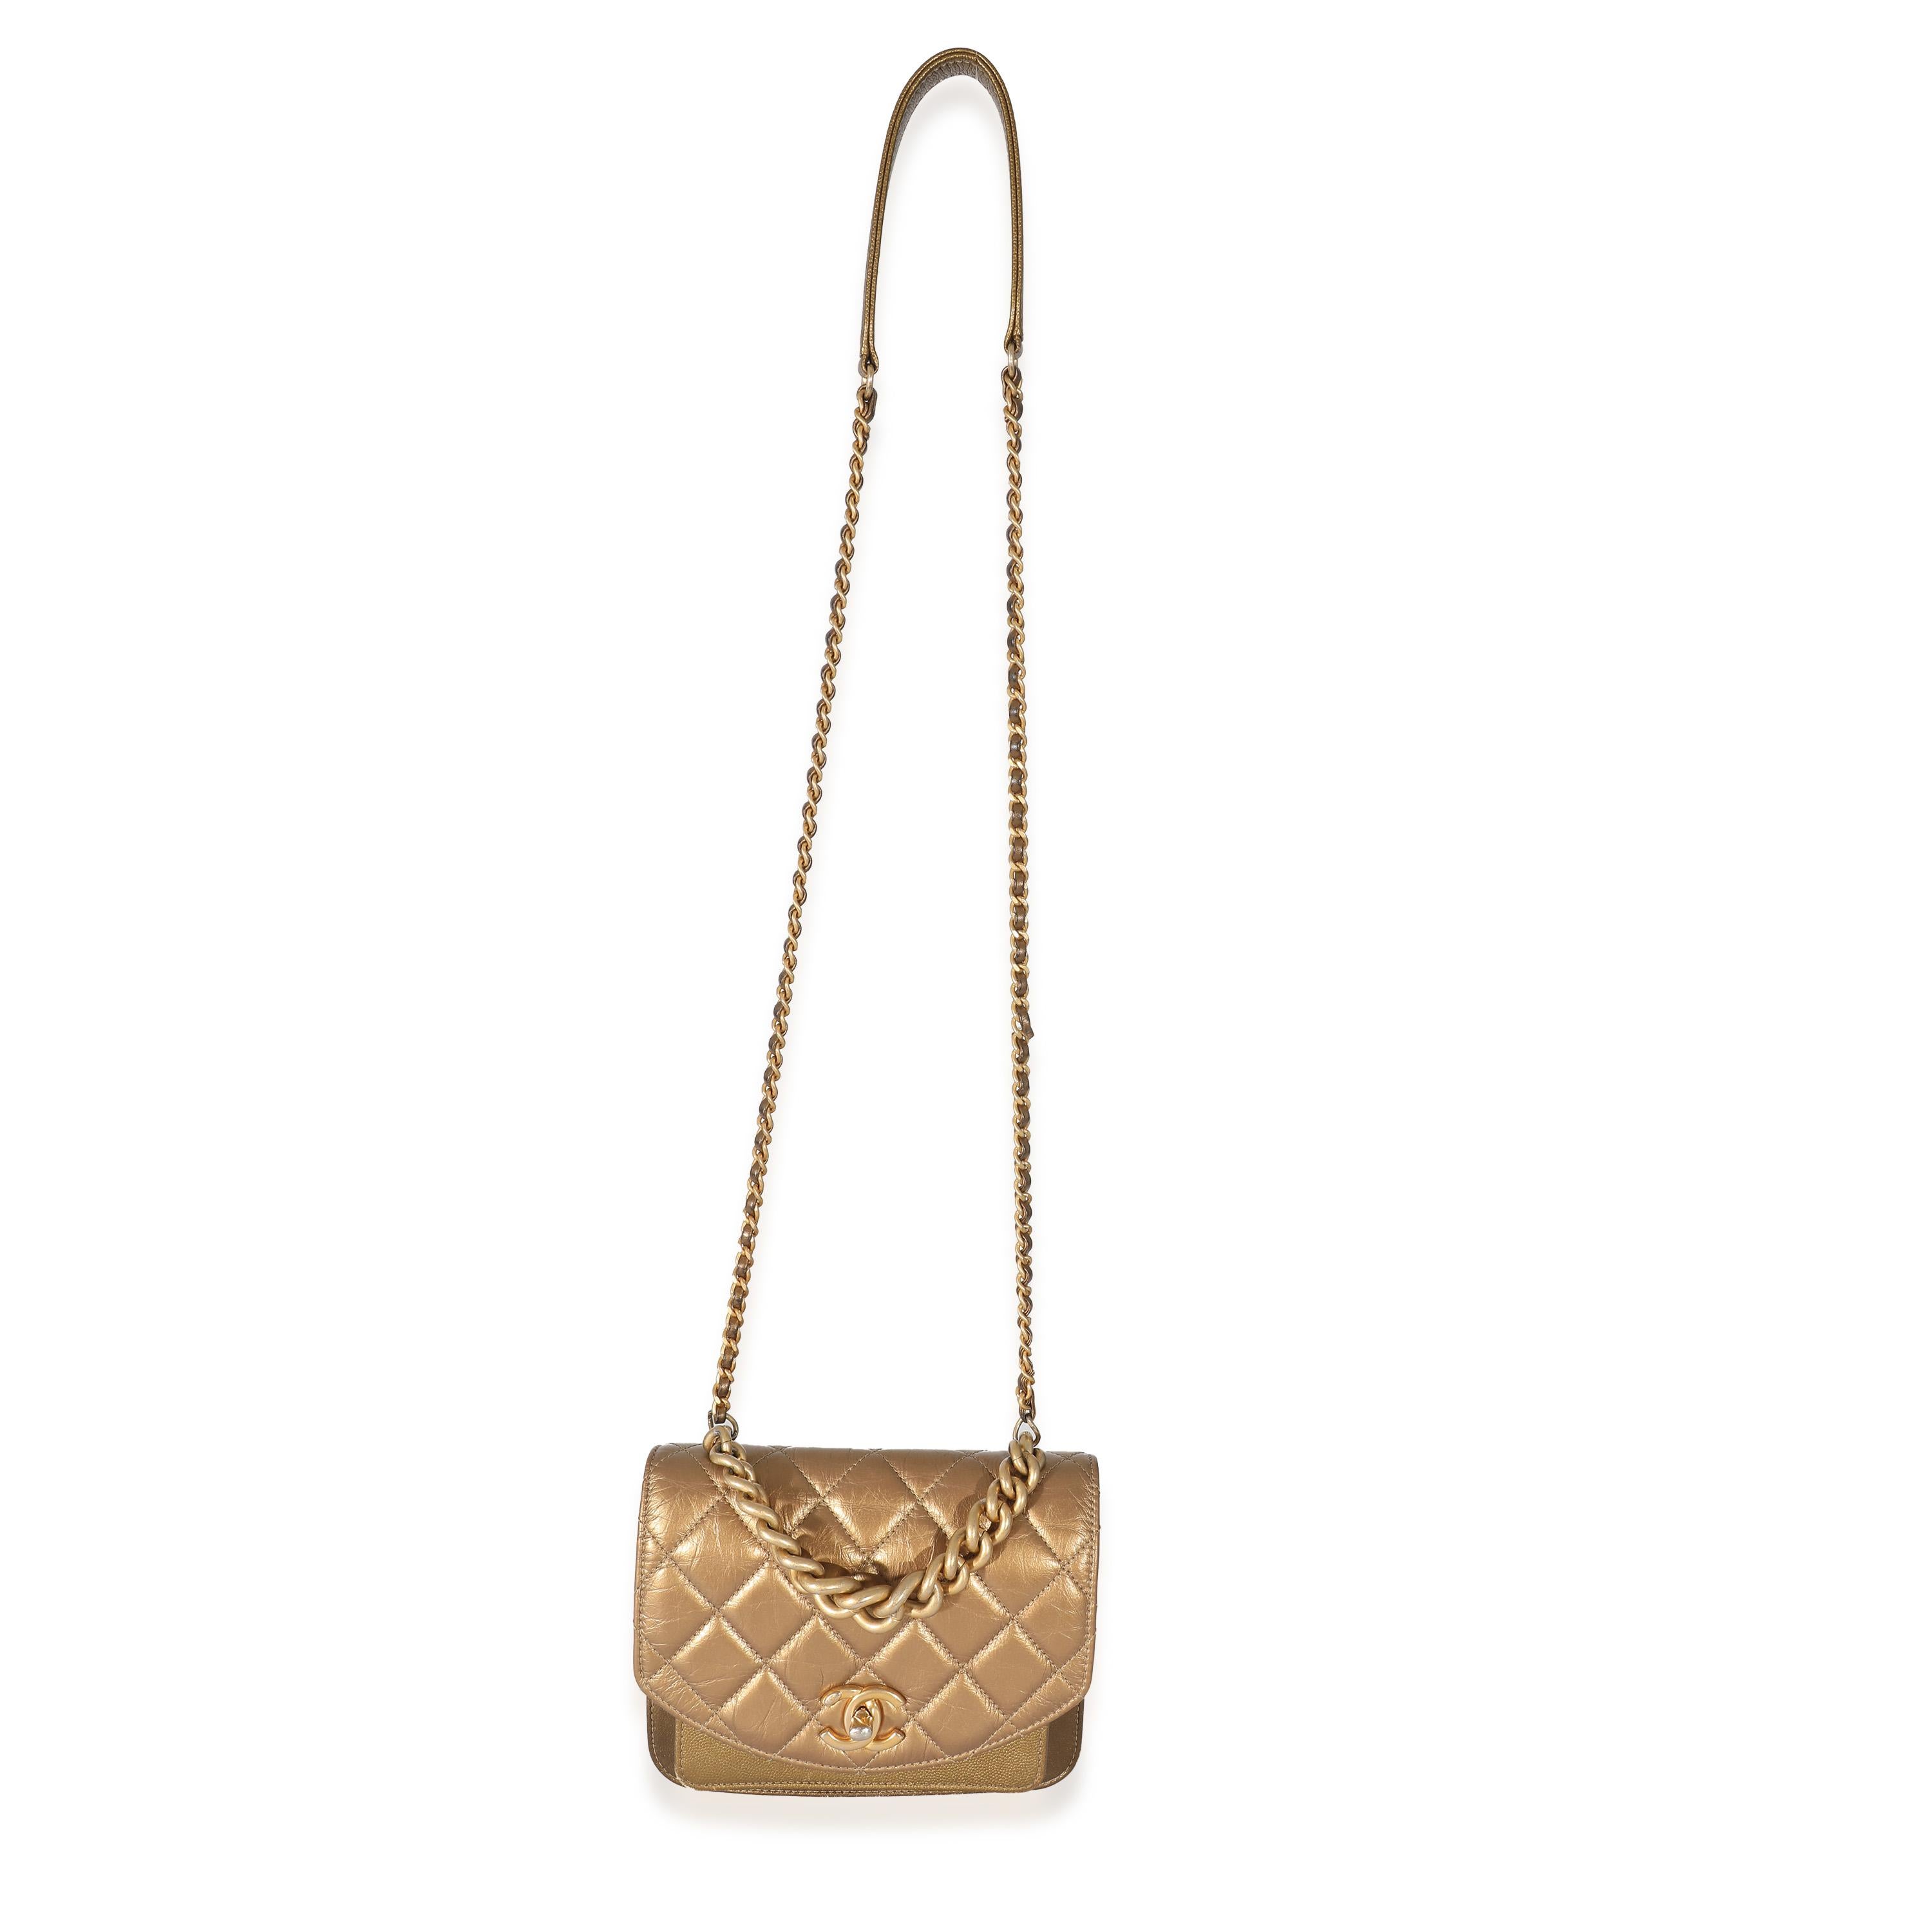 Listing Title: Chanel Gold Metallic Leather Mini Chain Handle Flap Bag
SKU: 134029
Condition: Pre-owned 
Handbag Condition: Very Good
Condition Comments: Item is in very good condition with minor signs of wear. Extensive scuffing, and discoloration